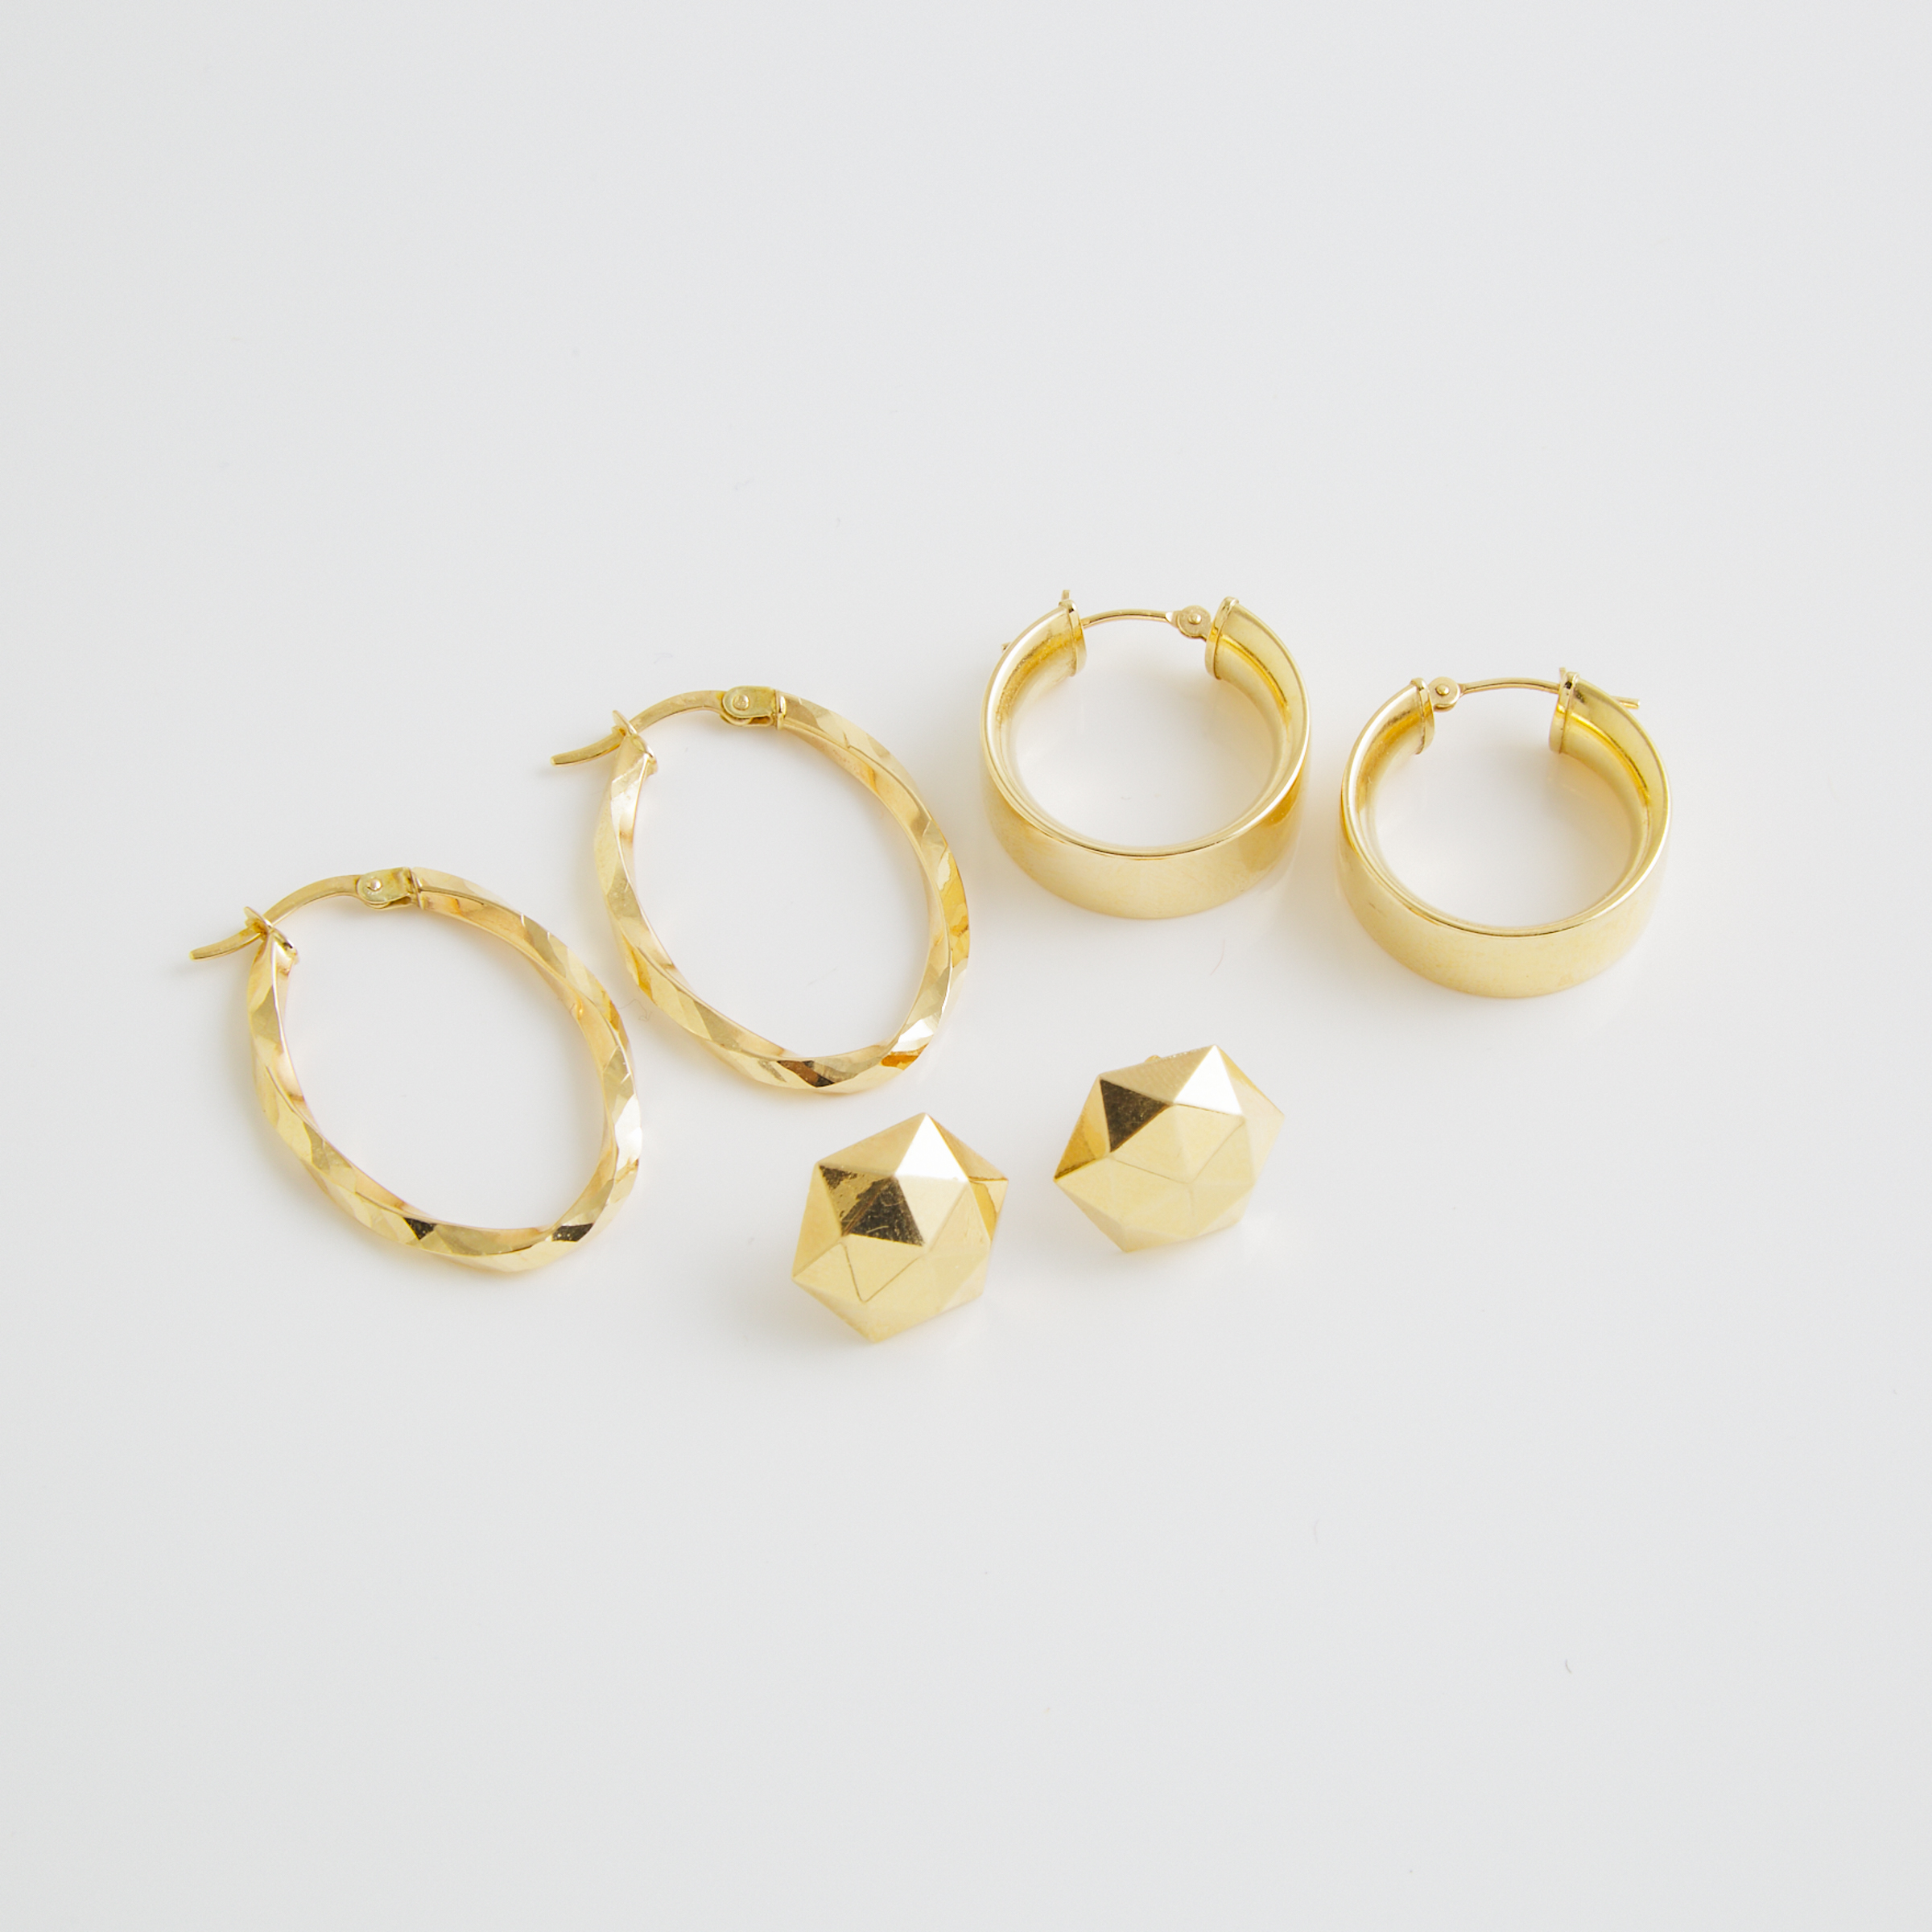 3 x Pairs Of 14k Yellow Gold Earrings